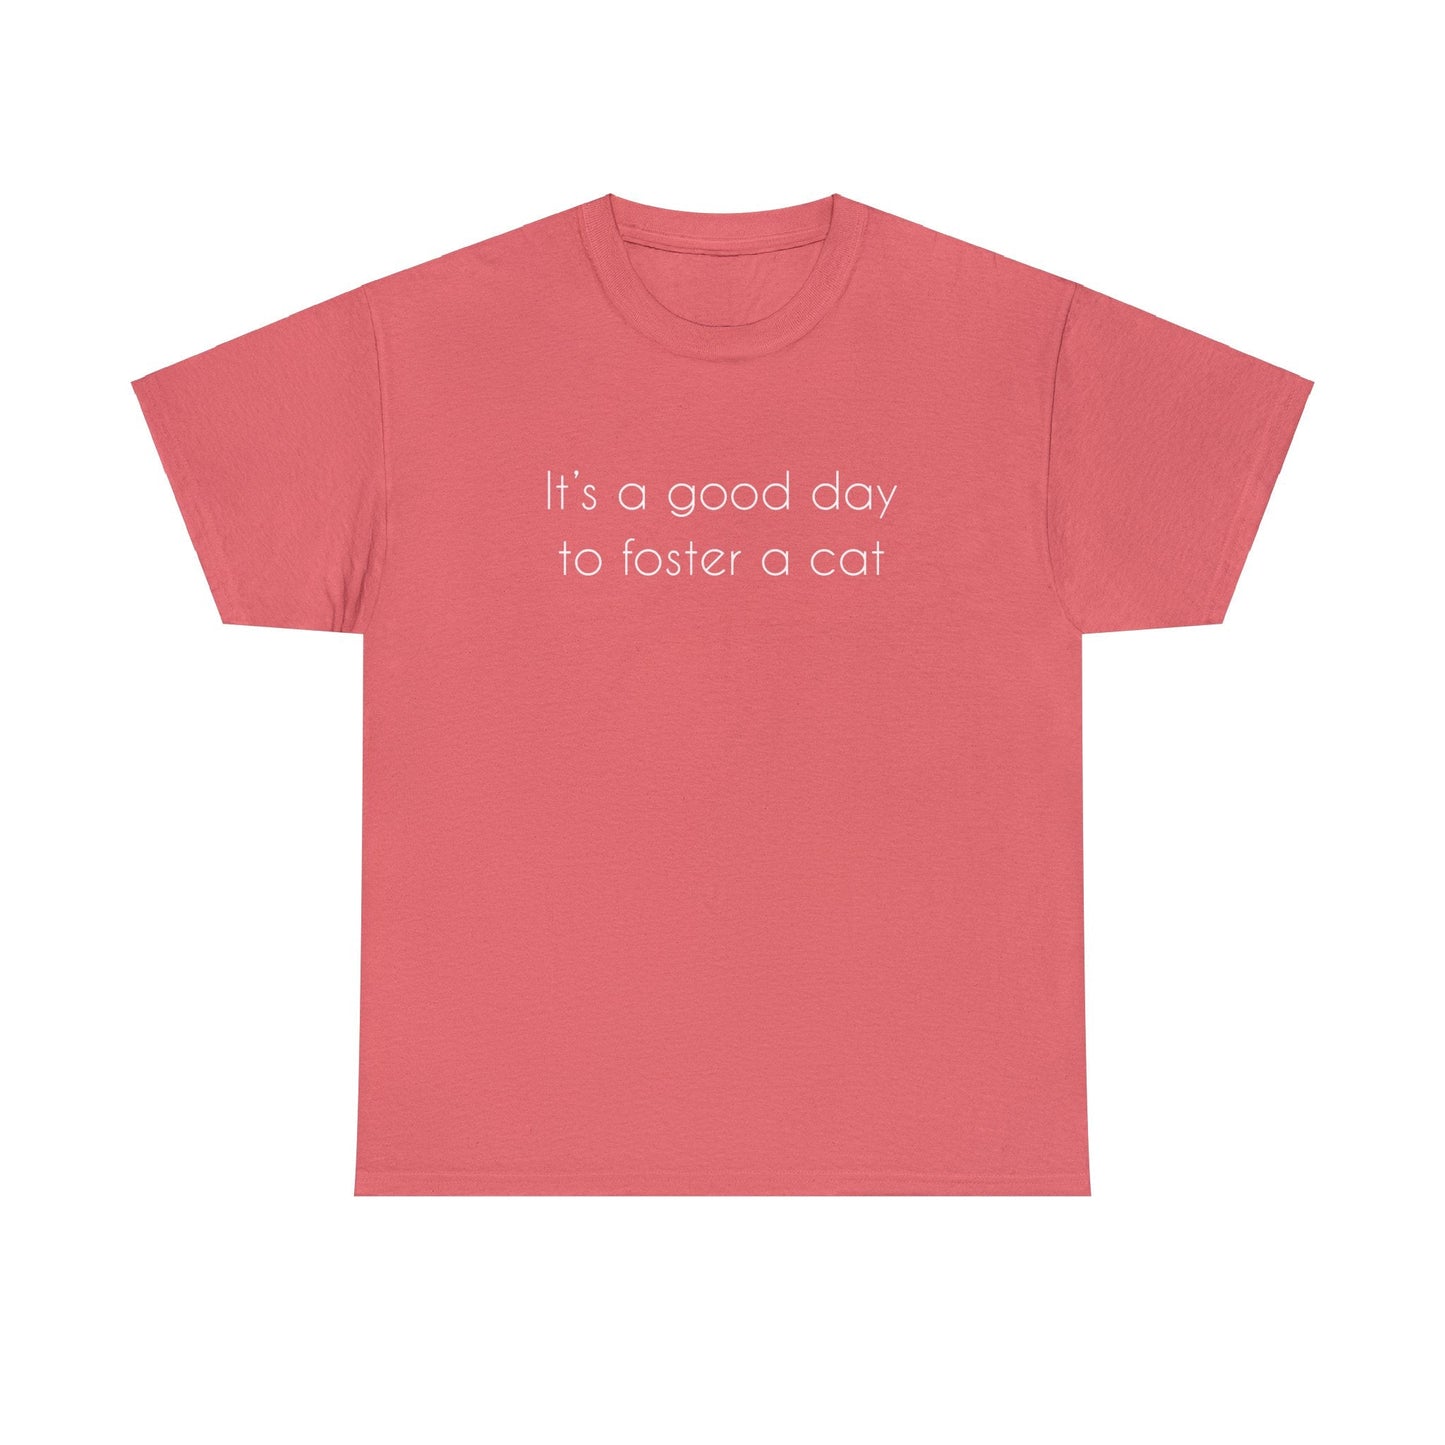 It's A Good Day To Foster A Cat | Text Tees - Detezi Designs-17380857062505147885